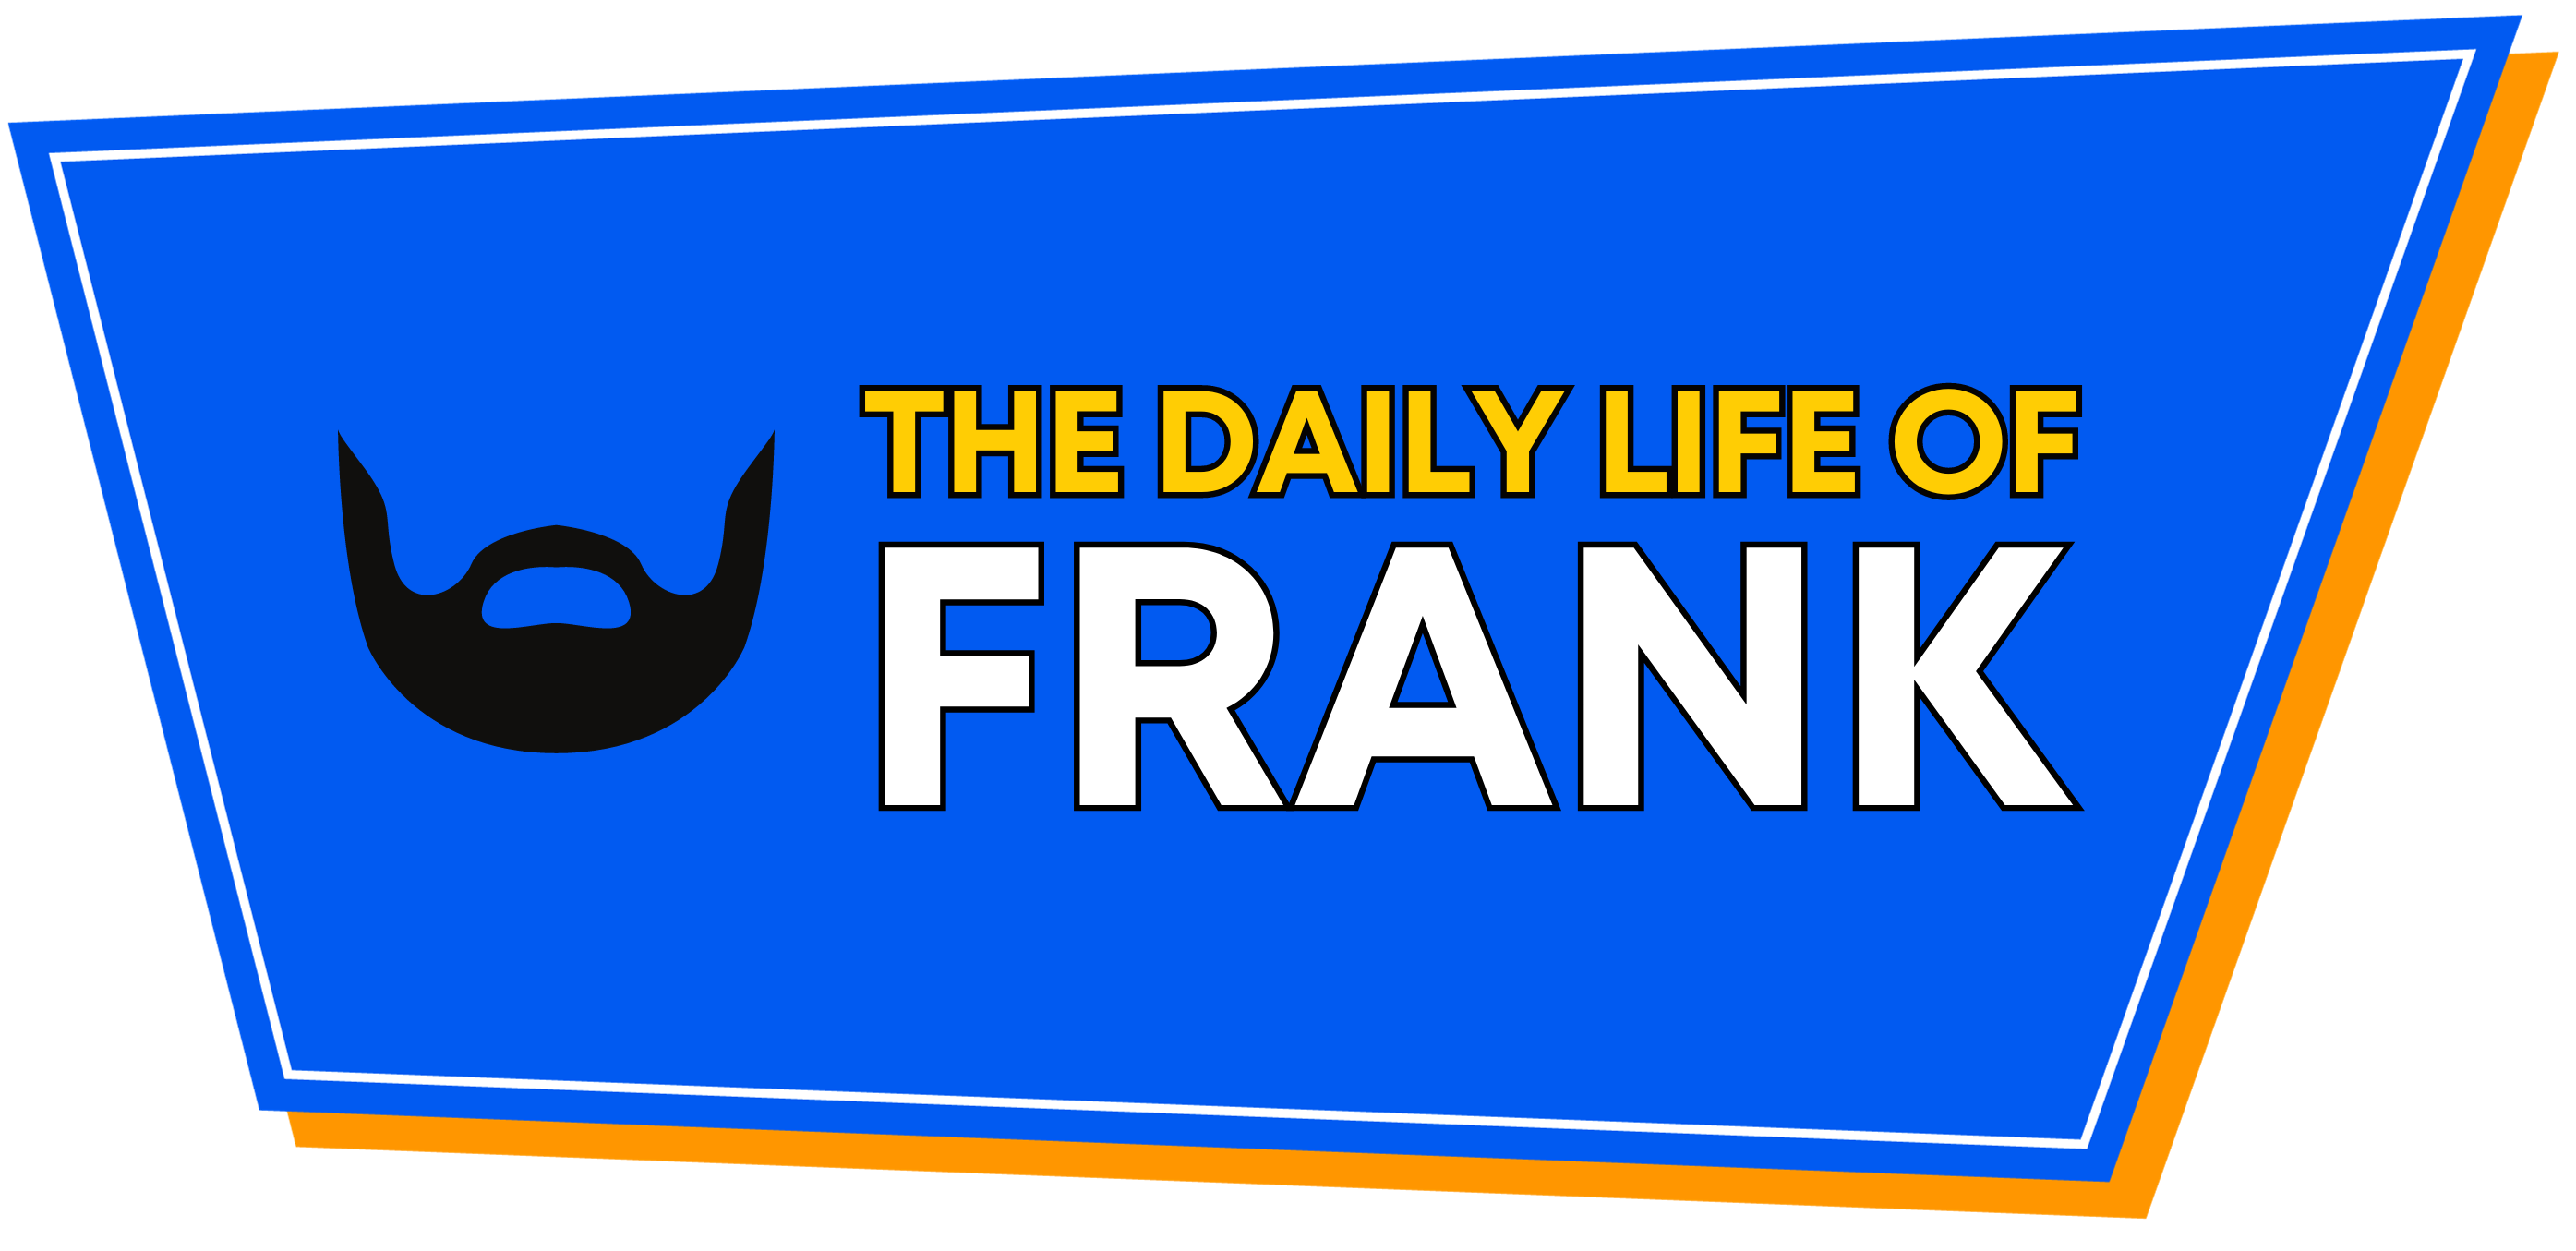 The logo of The Daily Life of Frank